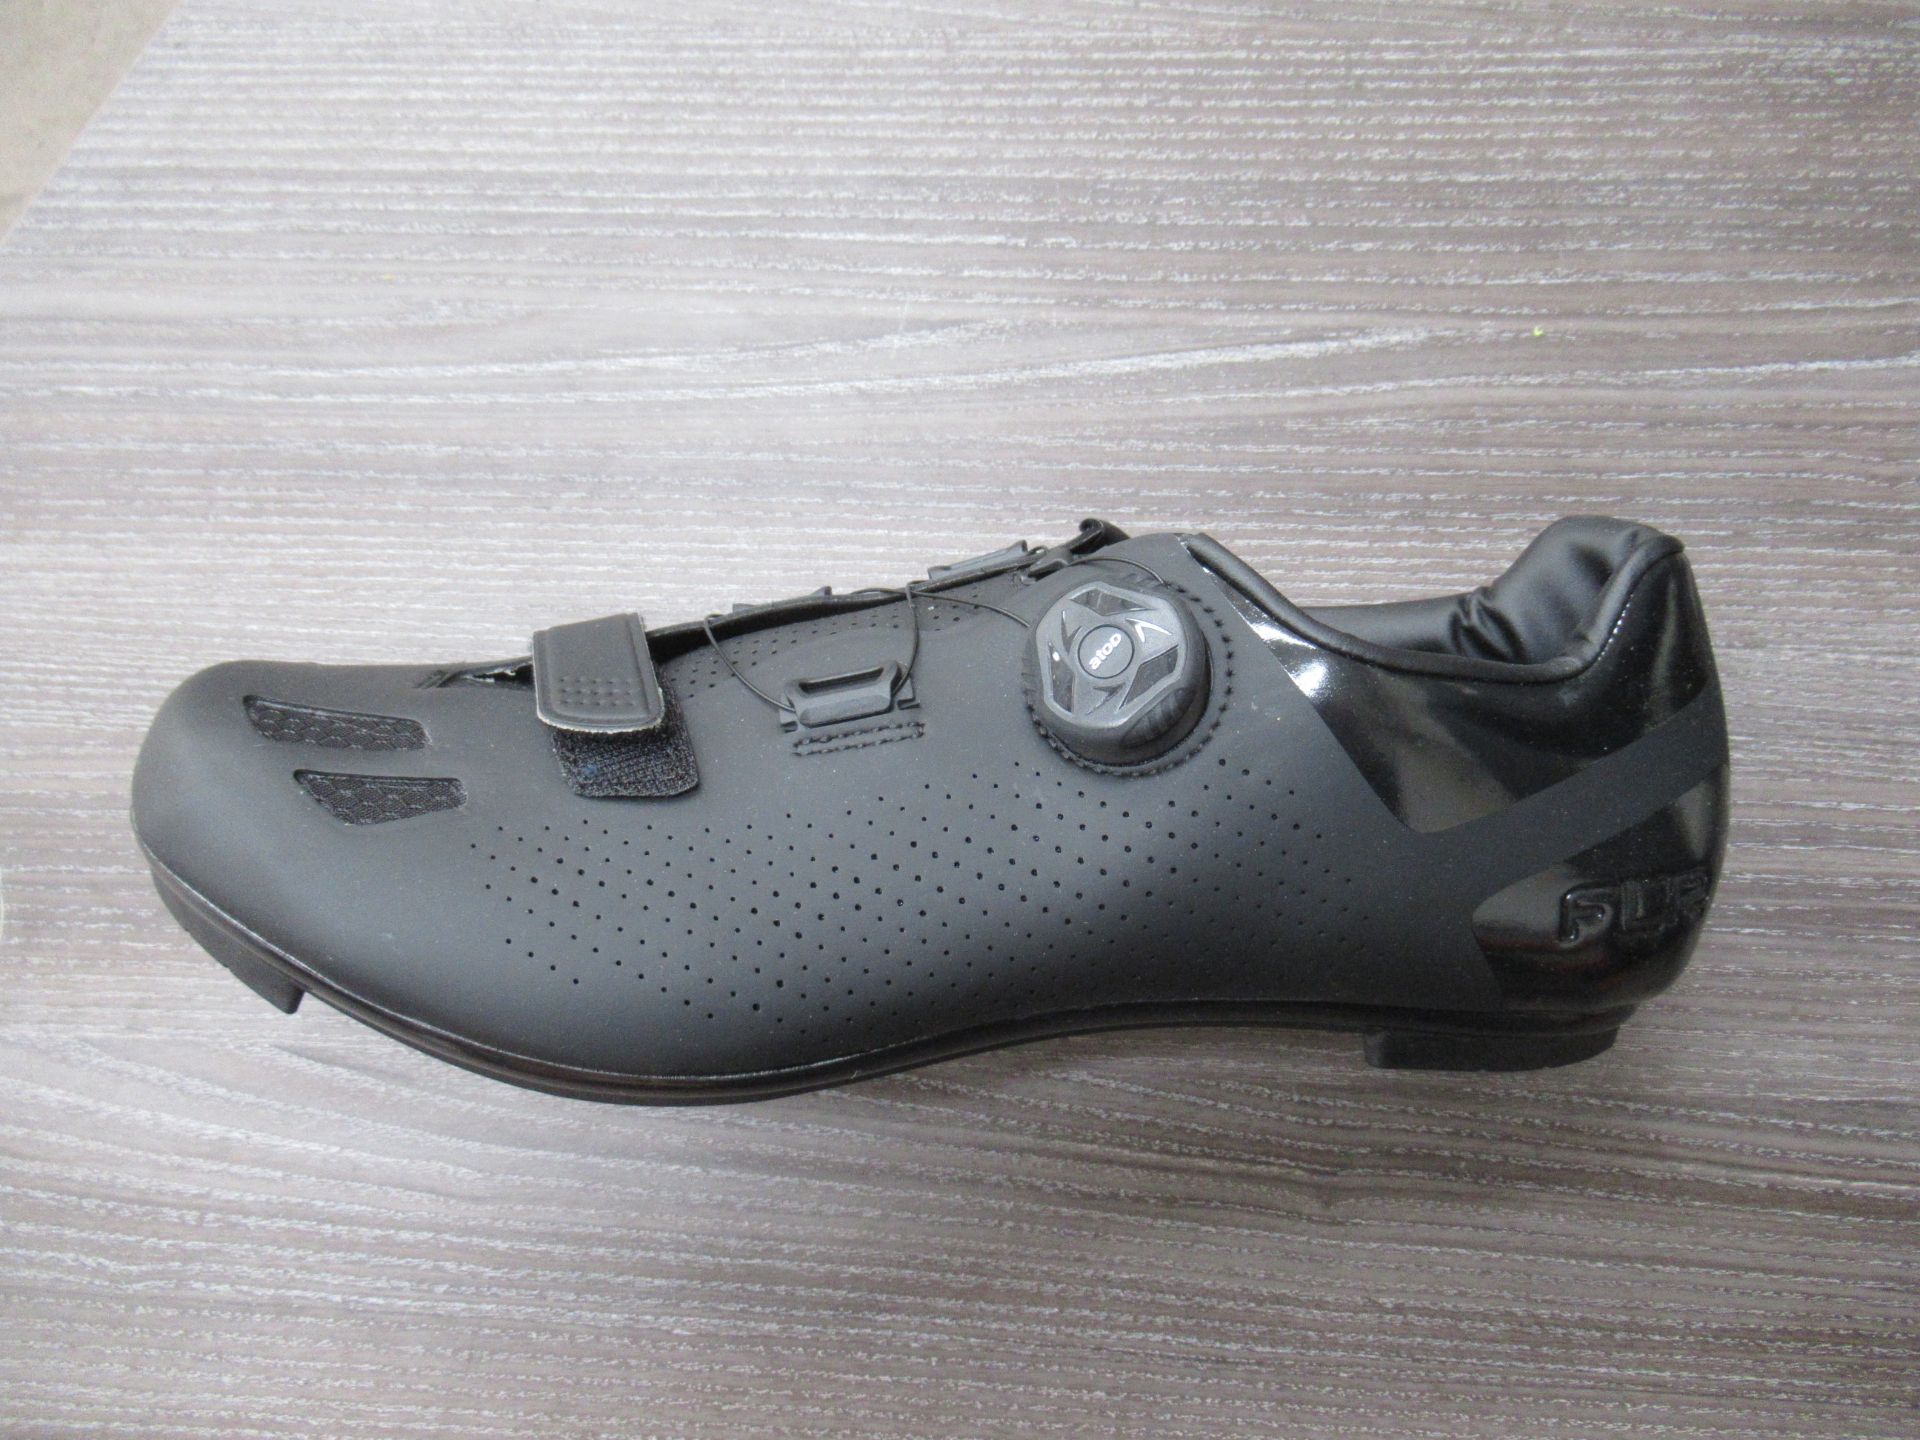 3 x Pairs of FLR cycling shoes - 1 x Bushmaster boxed EU size 41 (RRP£79.99); 1 x F-11 boxed EU size - Image 7 of 10